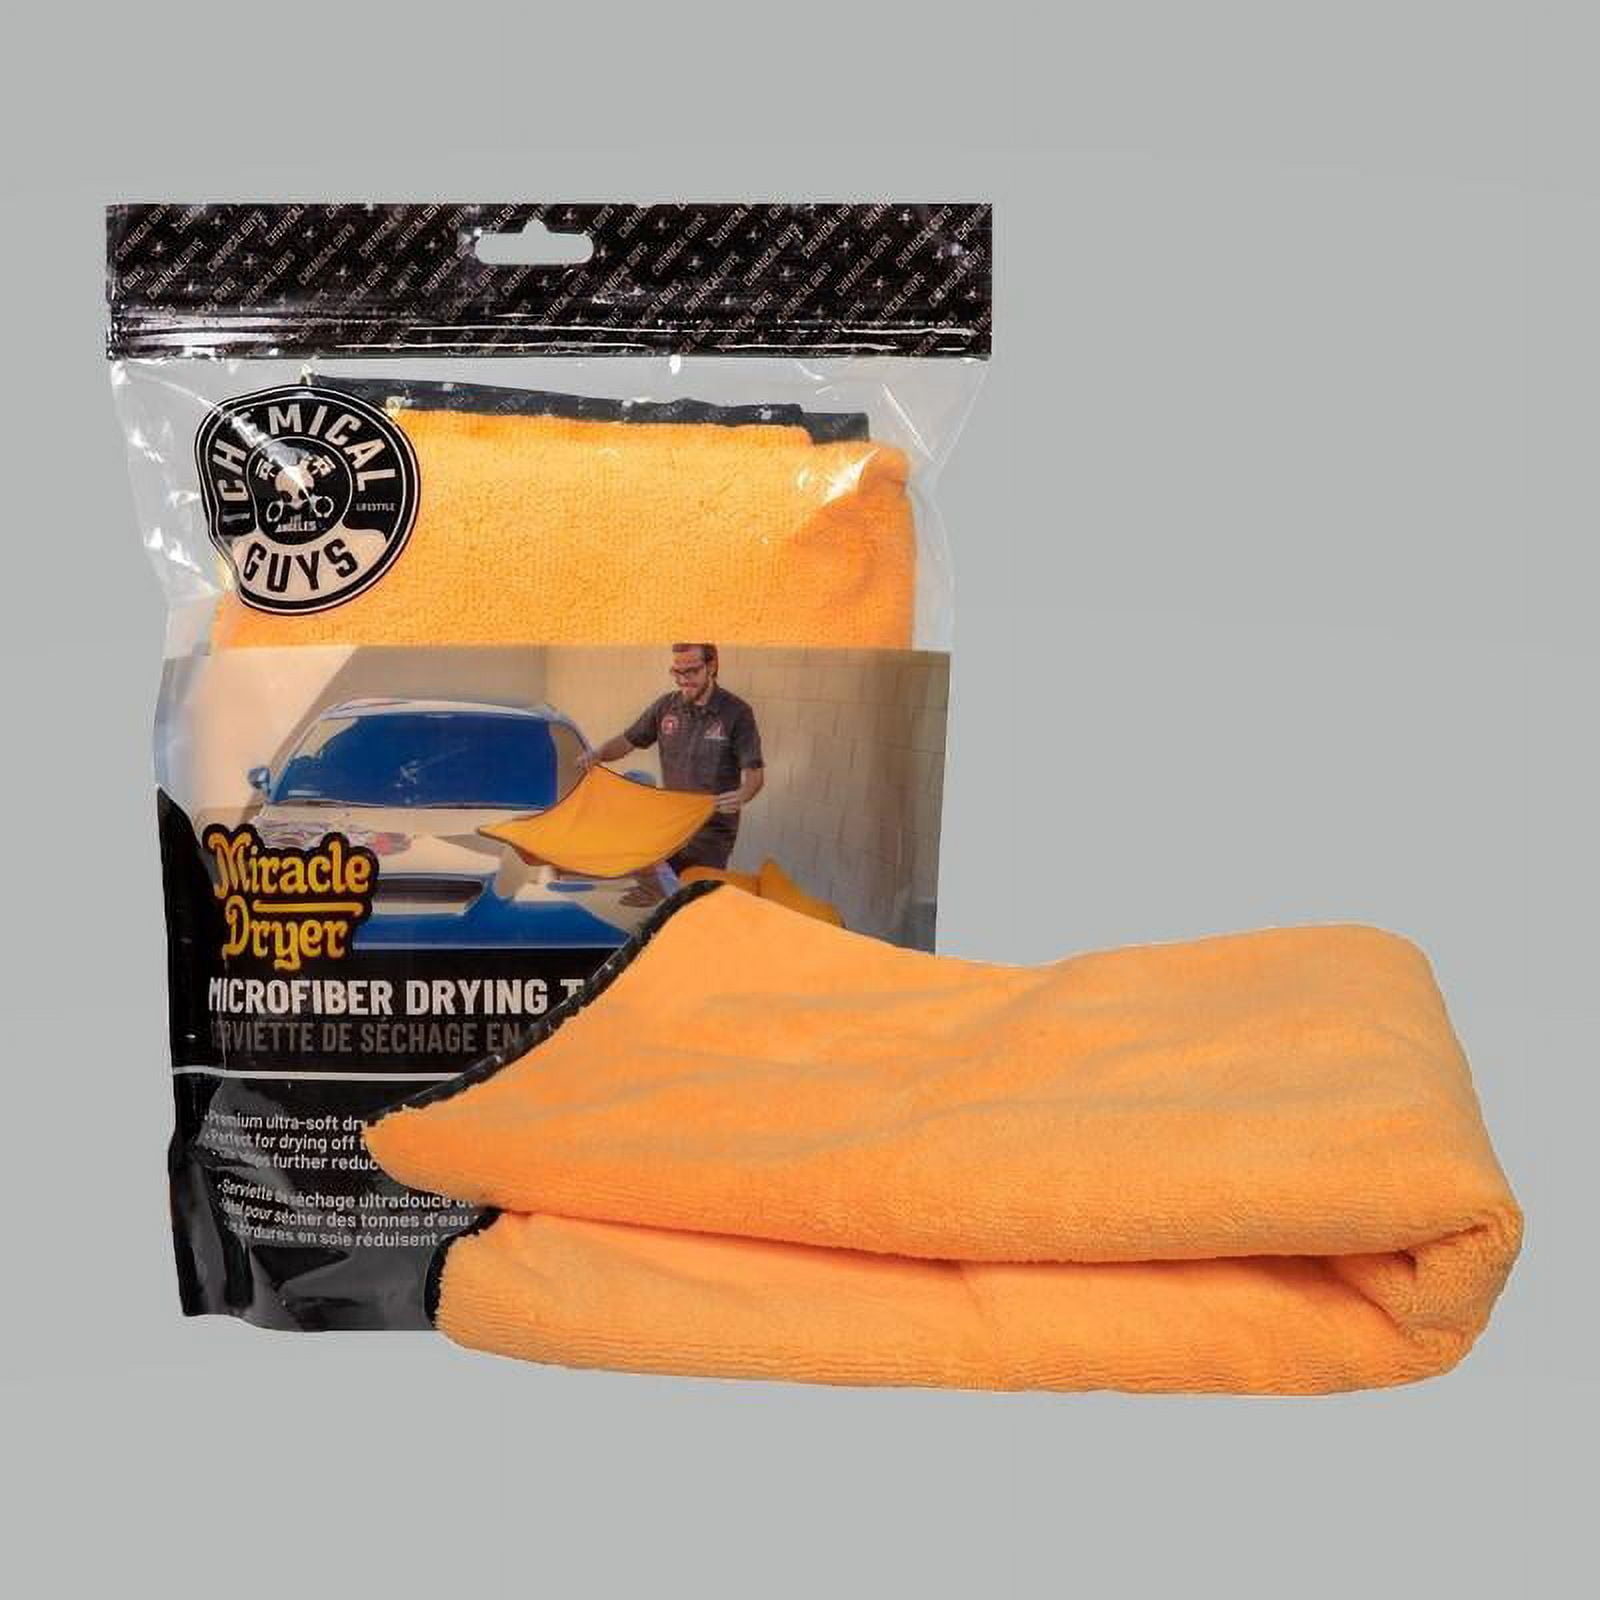 Chemical Guys Mic 725 Microfiber Drying Towel 36 X 25 Tax for sale online